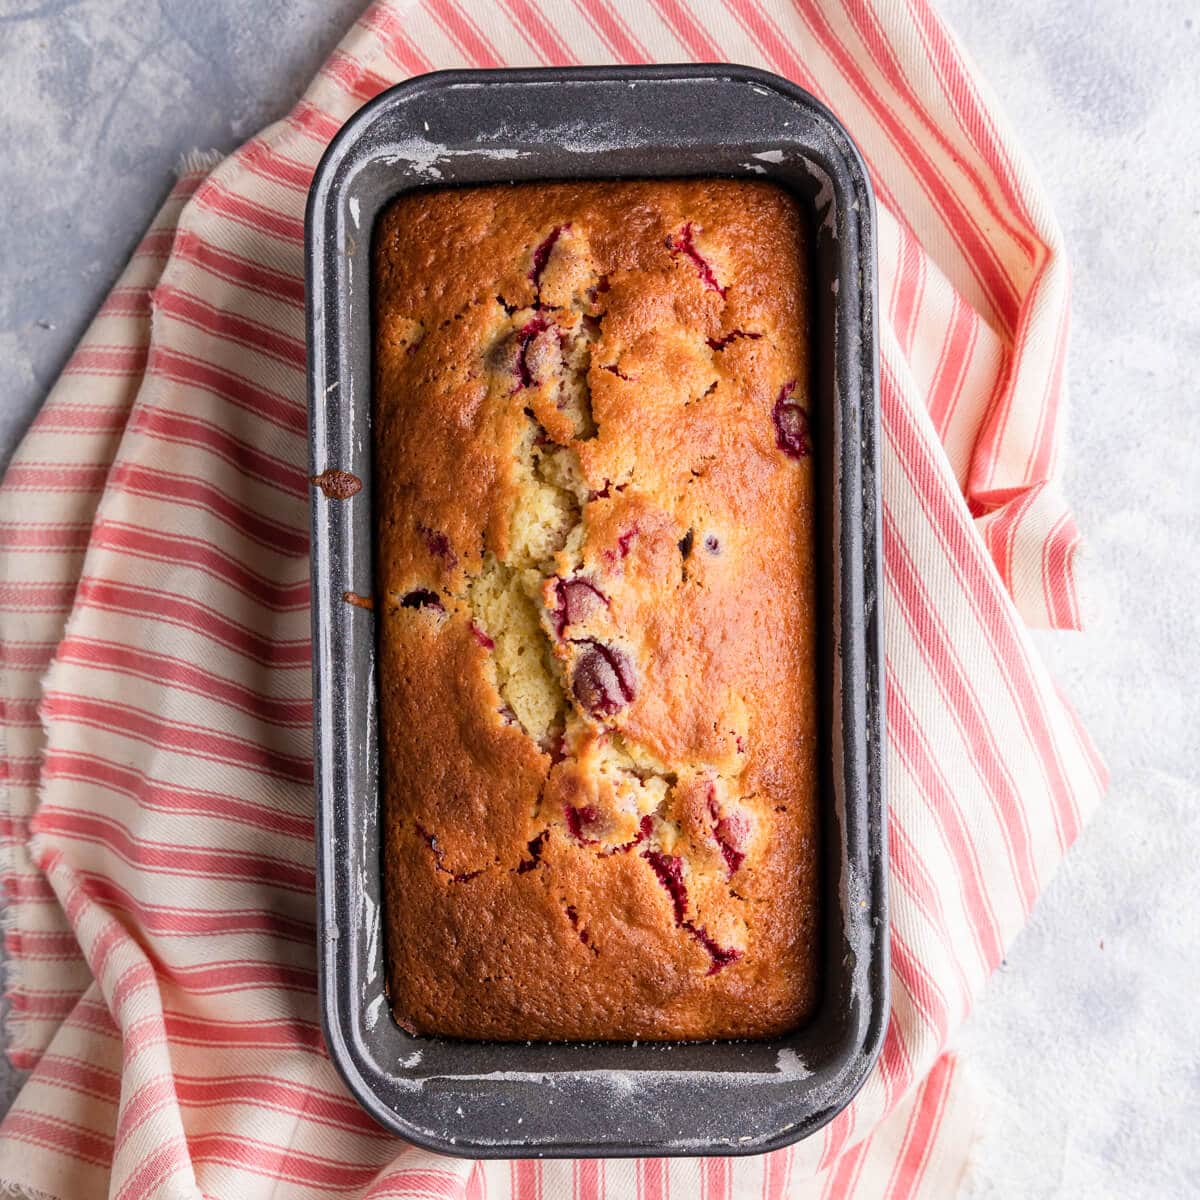 freshly baked orange and cranberry loaf in a baking tin.